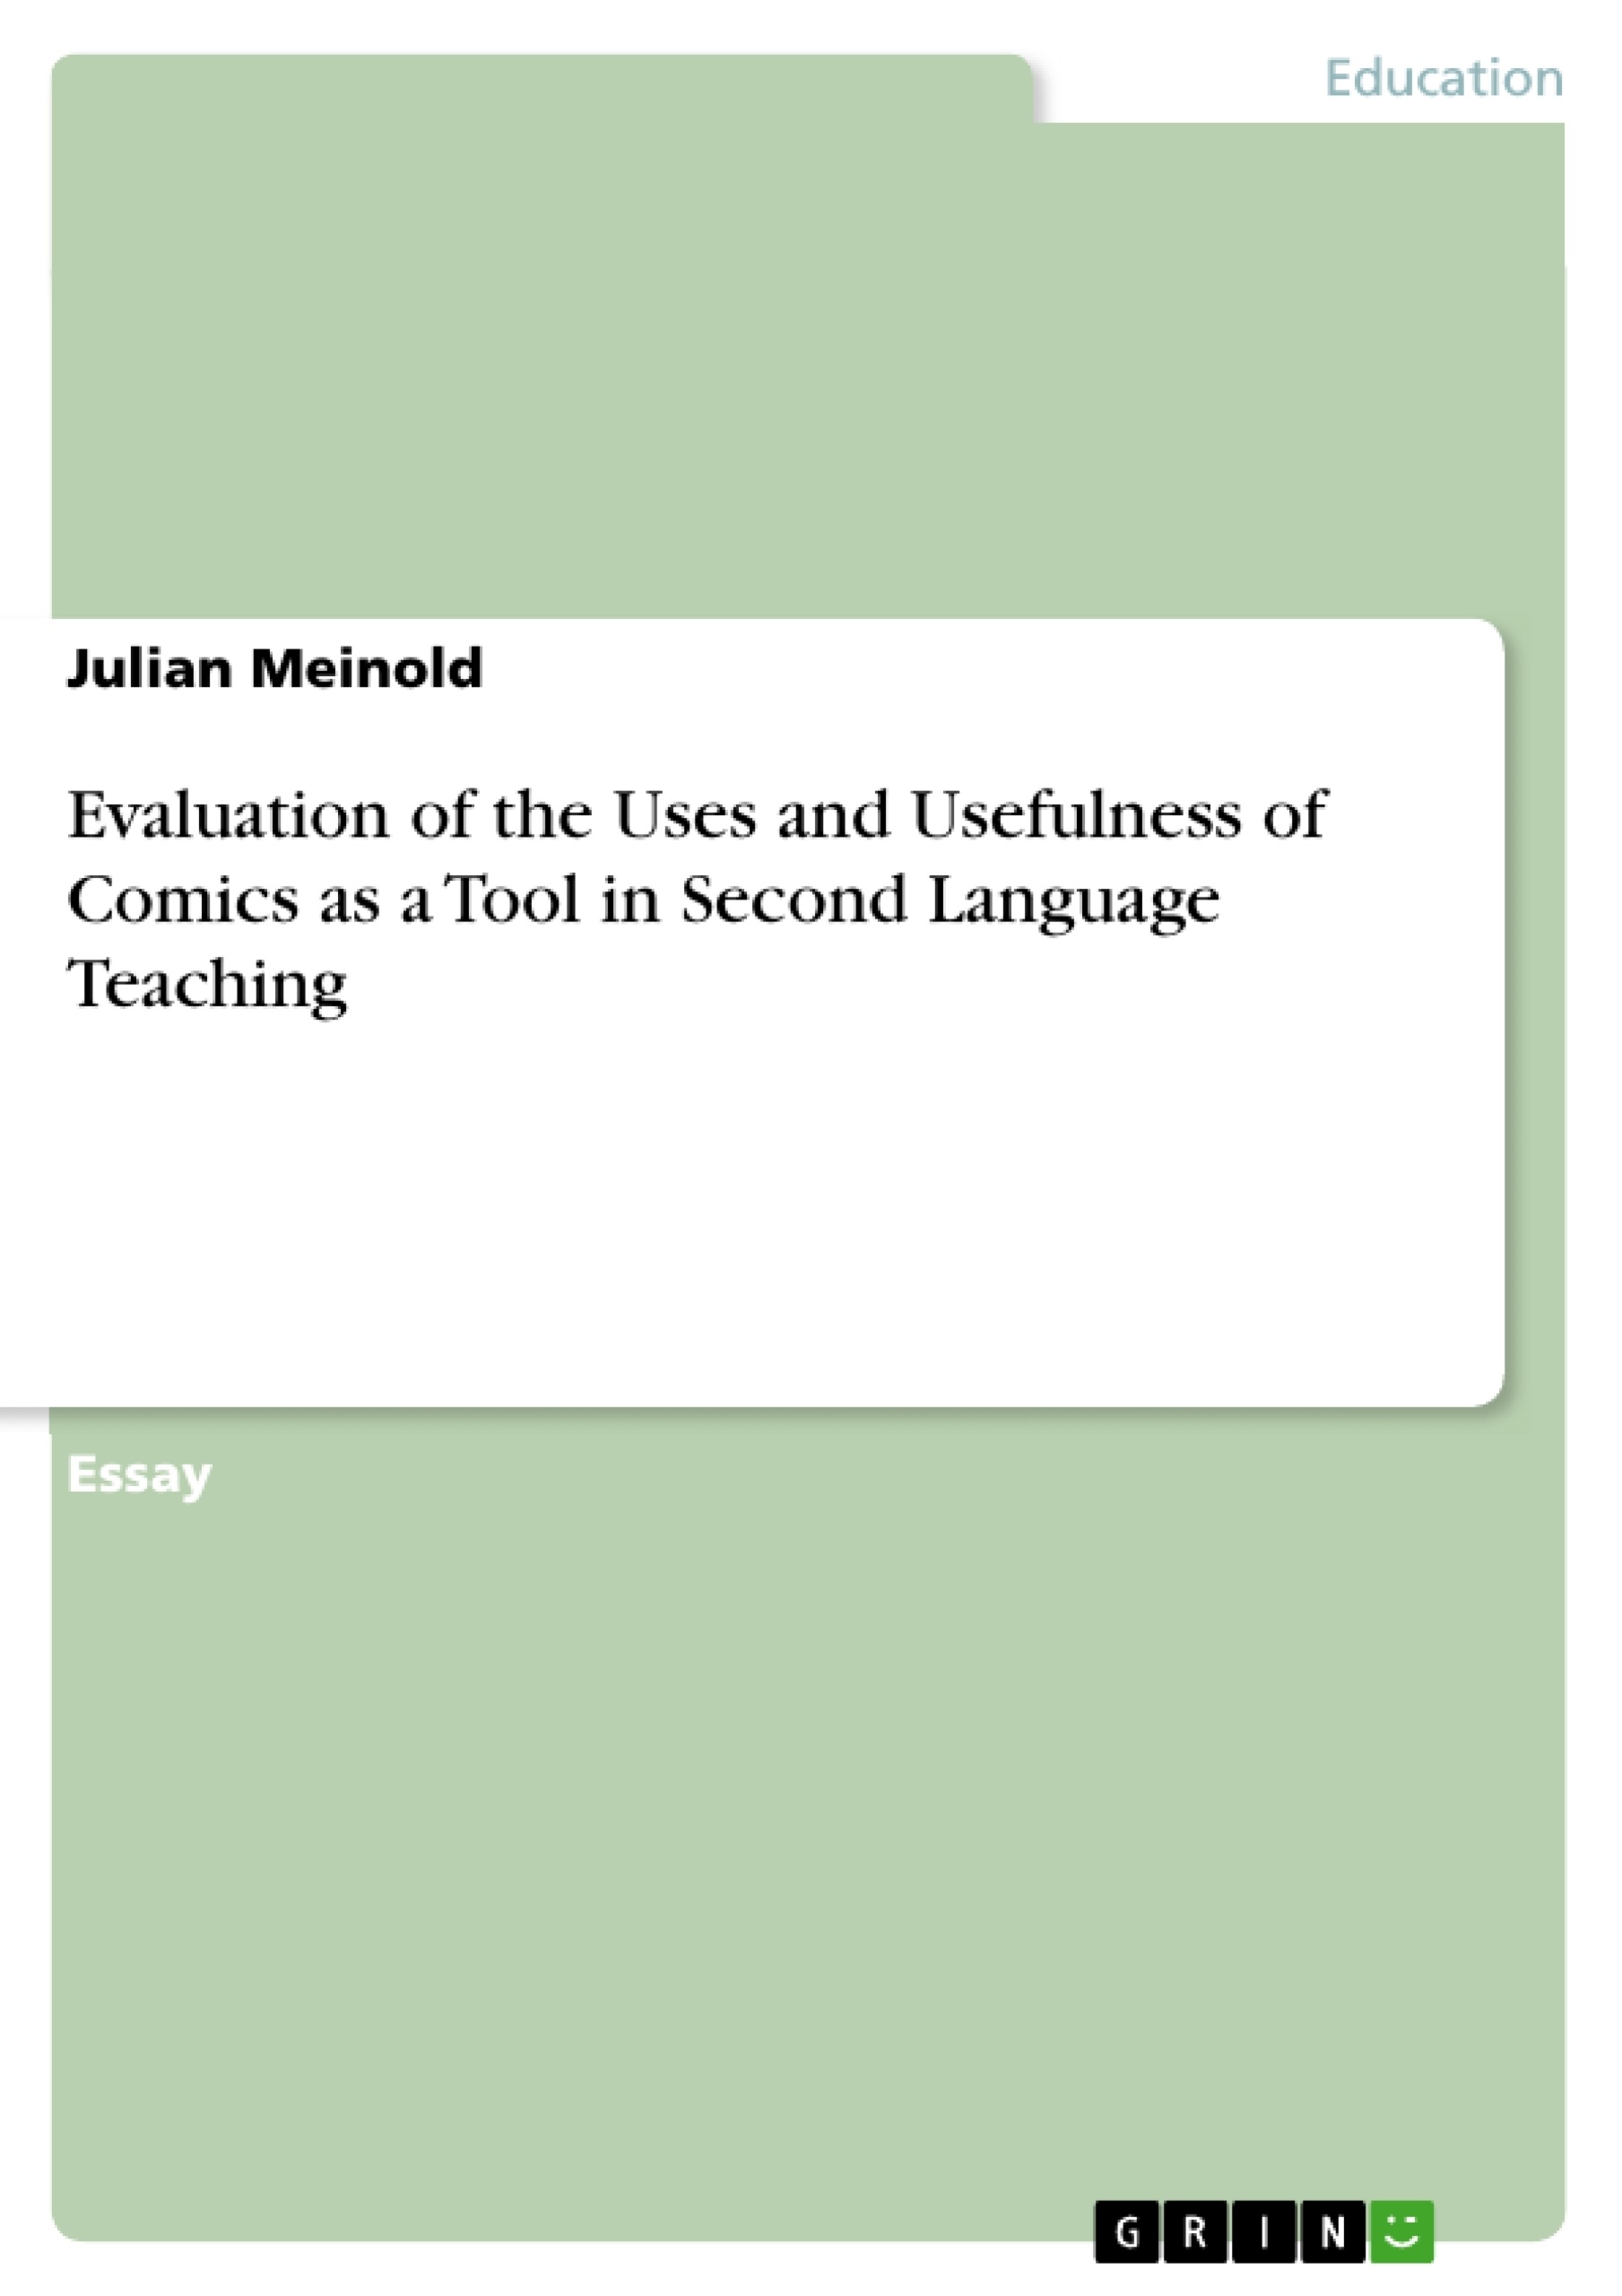 Title: Evaluation of the Uses and Usefulness of Comics as a Tool in Second Language Teaching